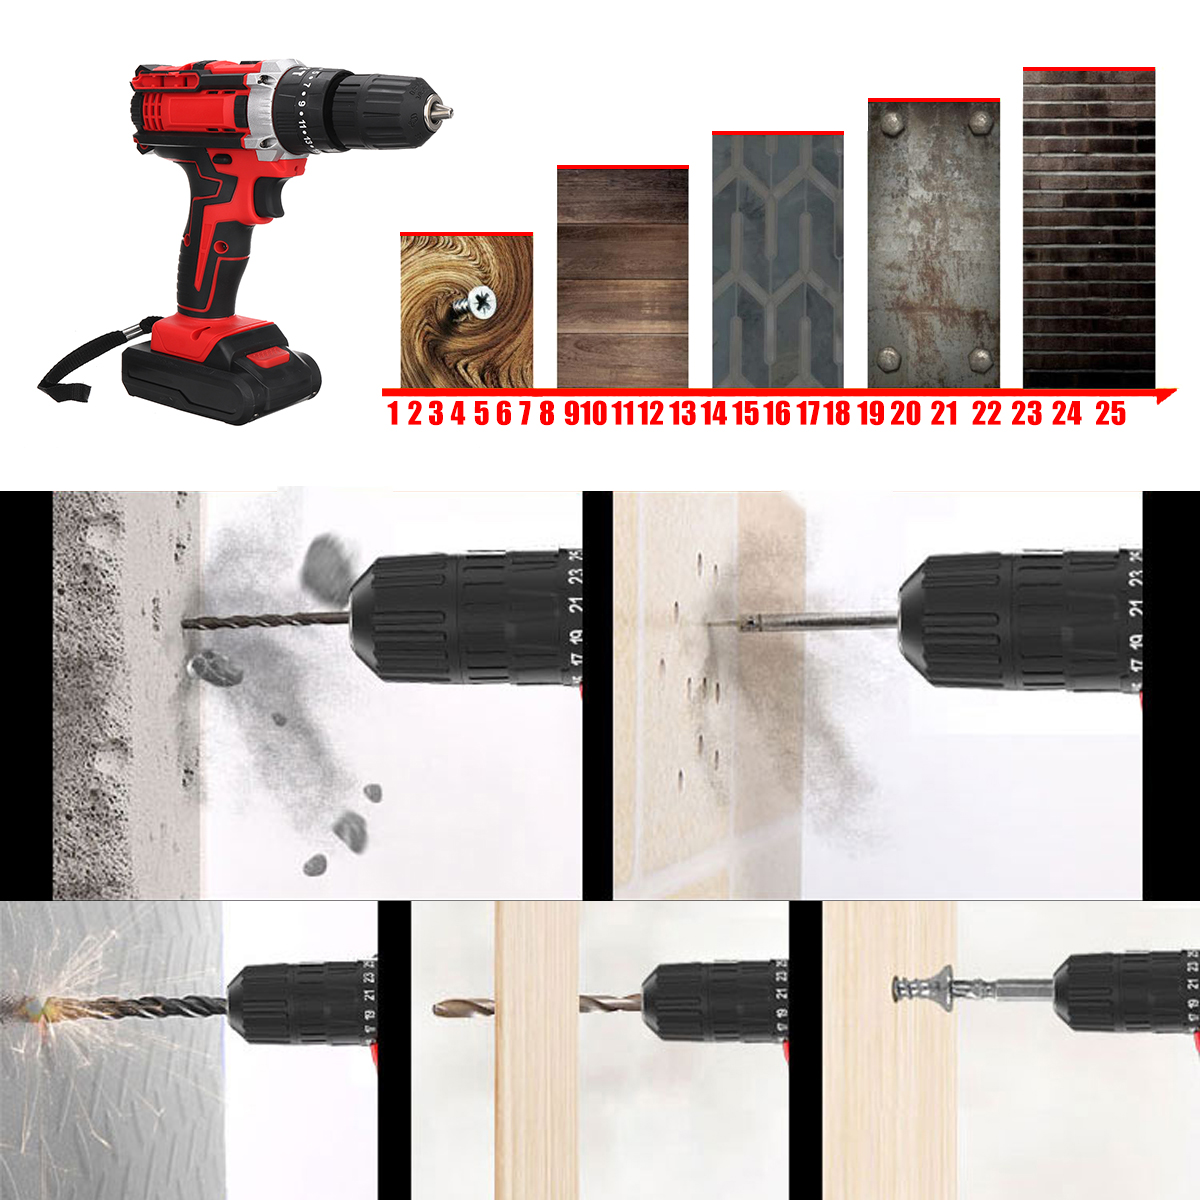 Cordless-Rechargeable-Electric-Drill-Screwdriver-LED-Portable-Metal-Wood-Drilling-Tool-W-12pcs-Batte-1848724-6